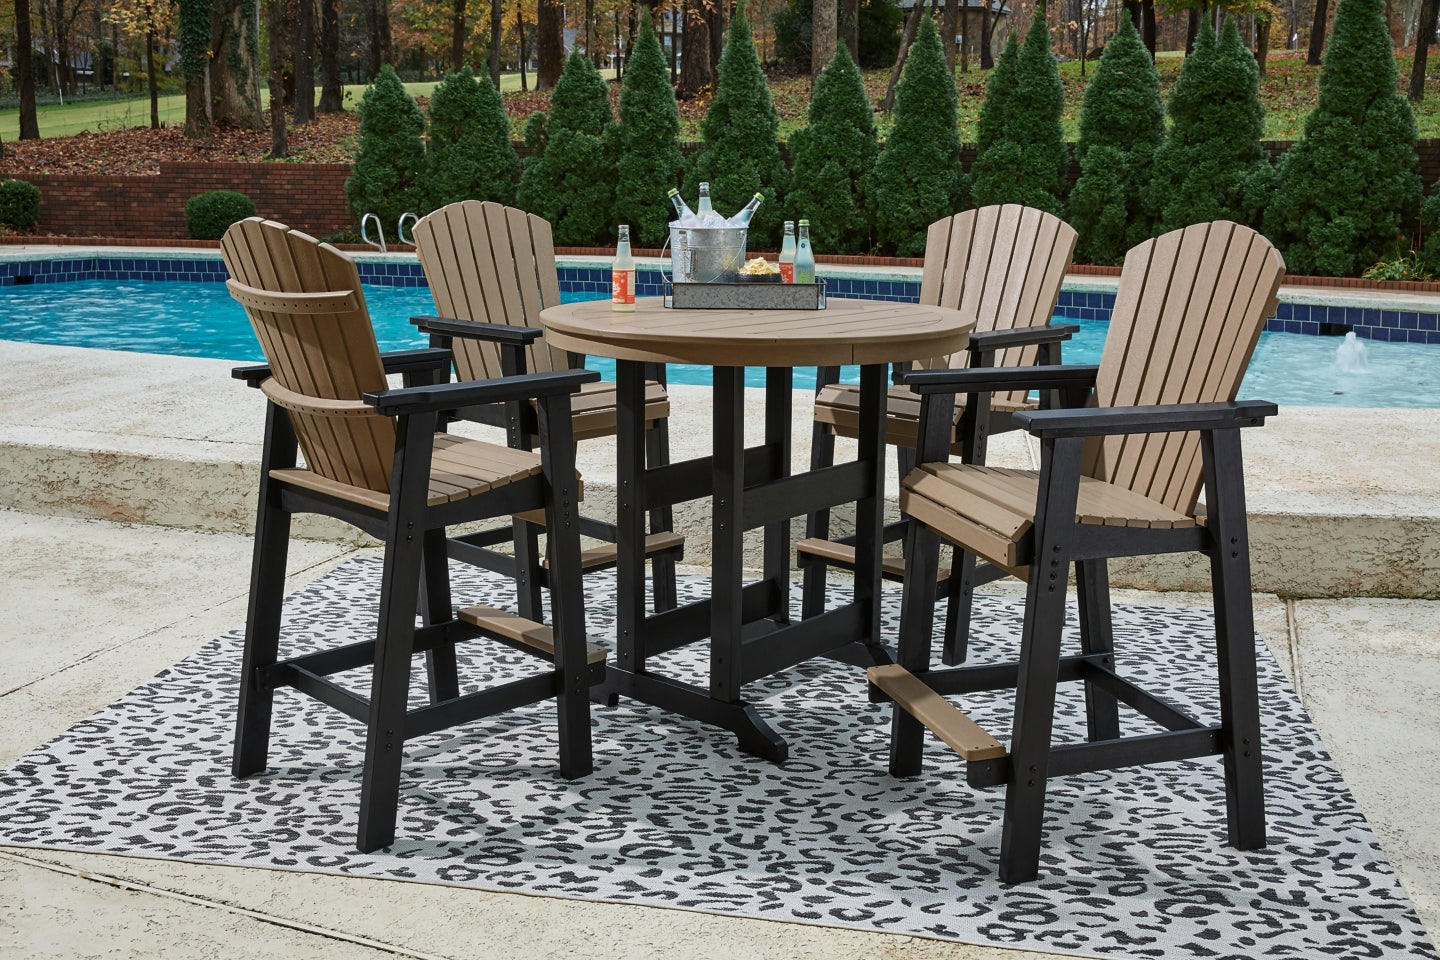 Fairen Trail Outdoor Counter Height Dining Table with 2 Barstools - furniture place usa